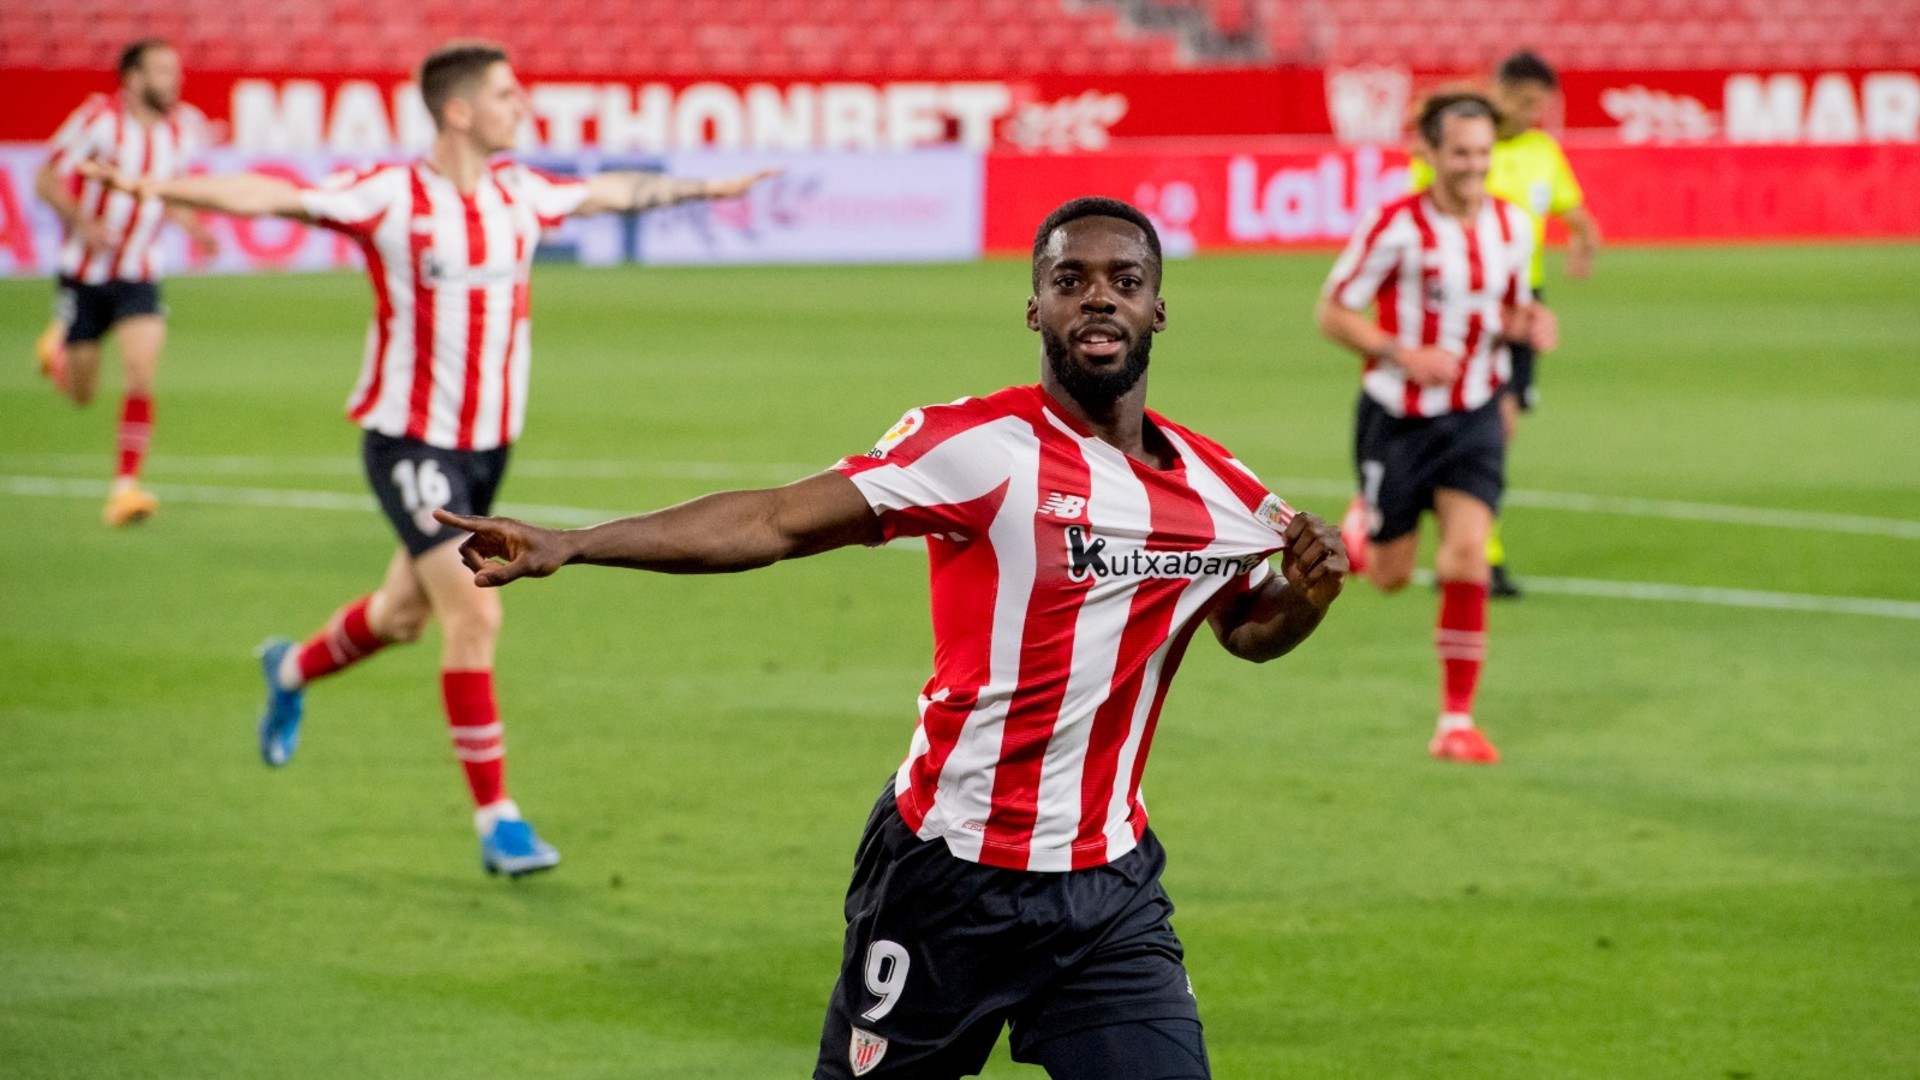 Inaki Williams scored the later winner for Athletic Club at Sevilla on Monday; Credit: Twitter/@Athletic_en